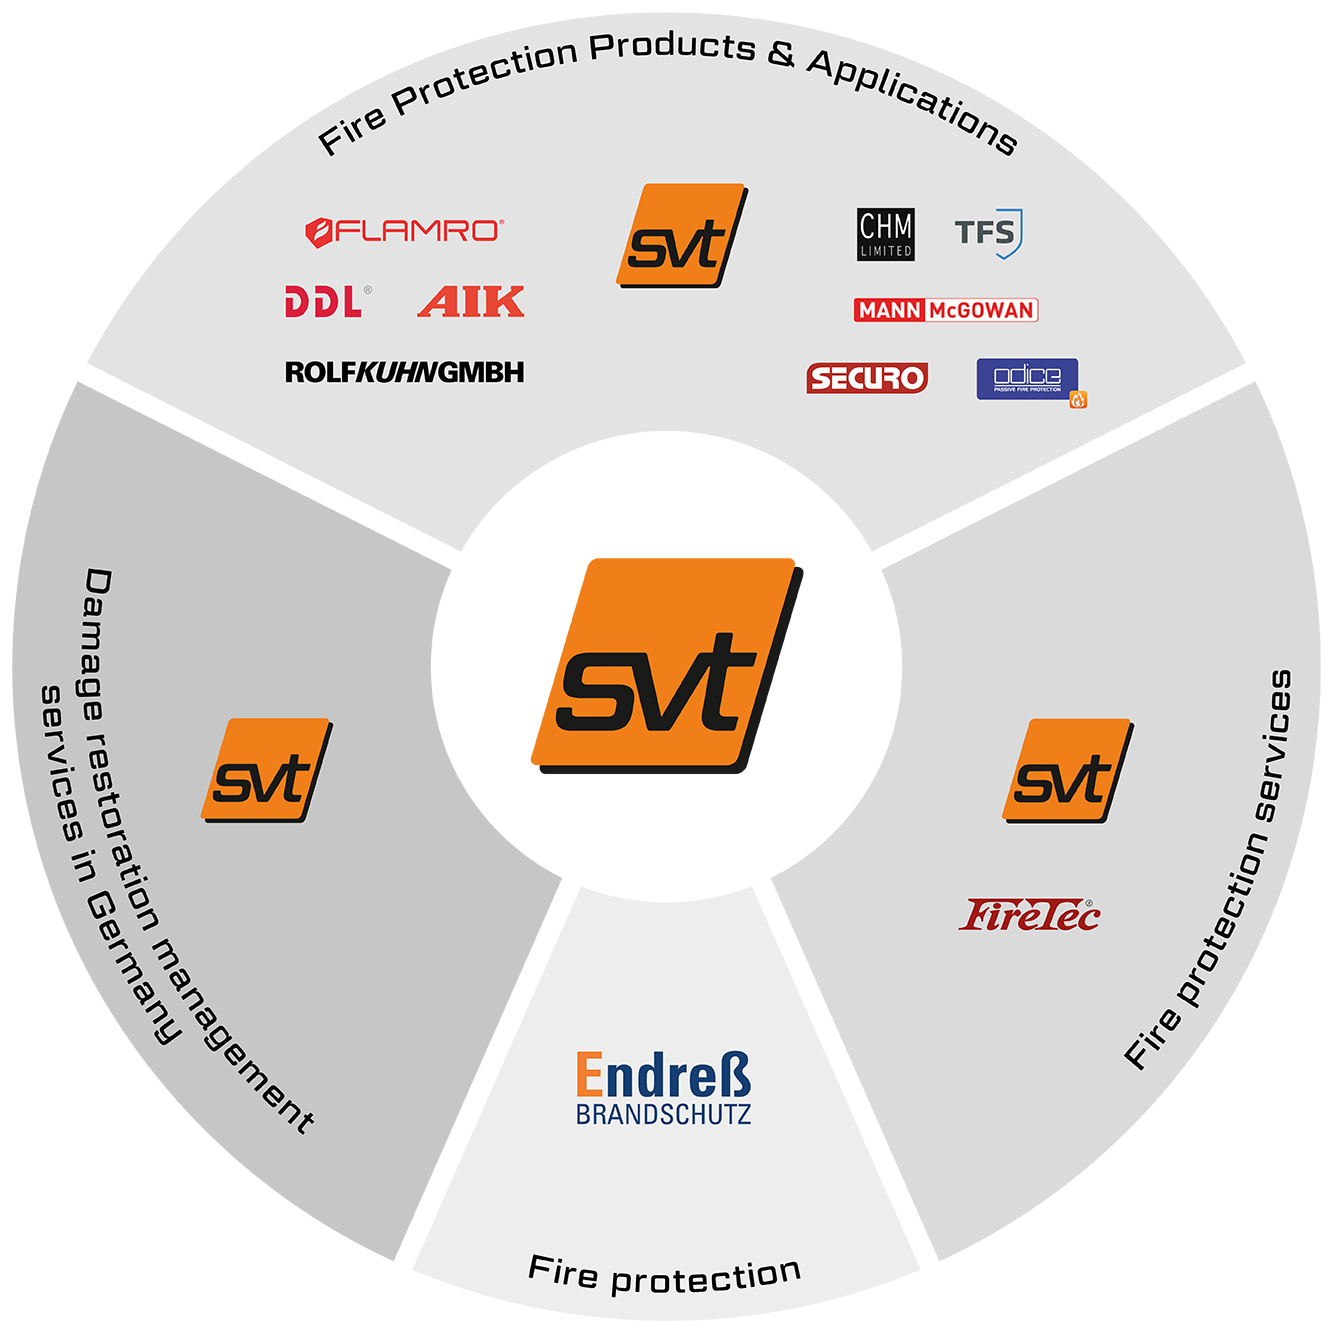 The companies of the svt Group: The brands for fire protection products and applications, damage restoration management services in Germany, concept fire protection and fire protection services at a glance.